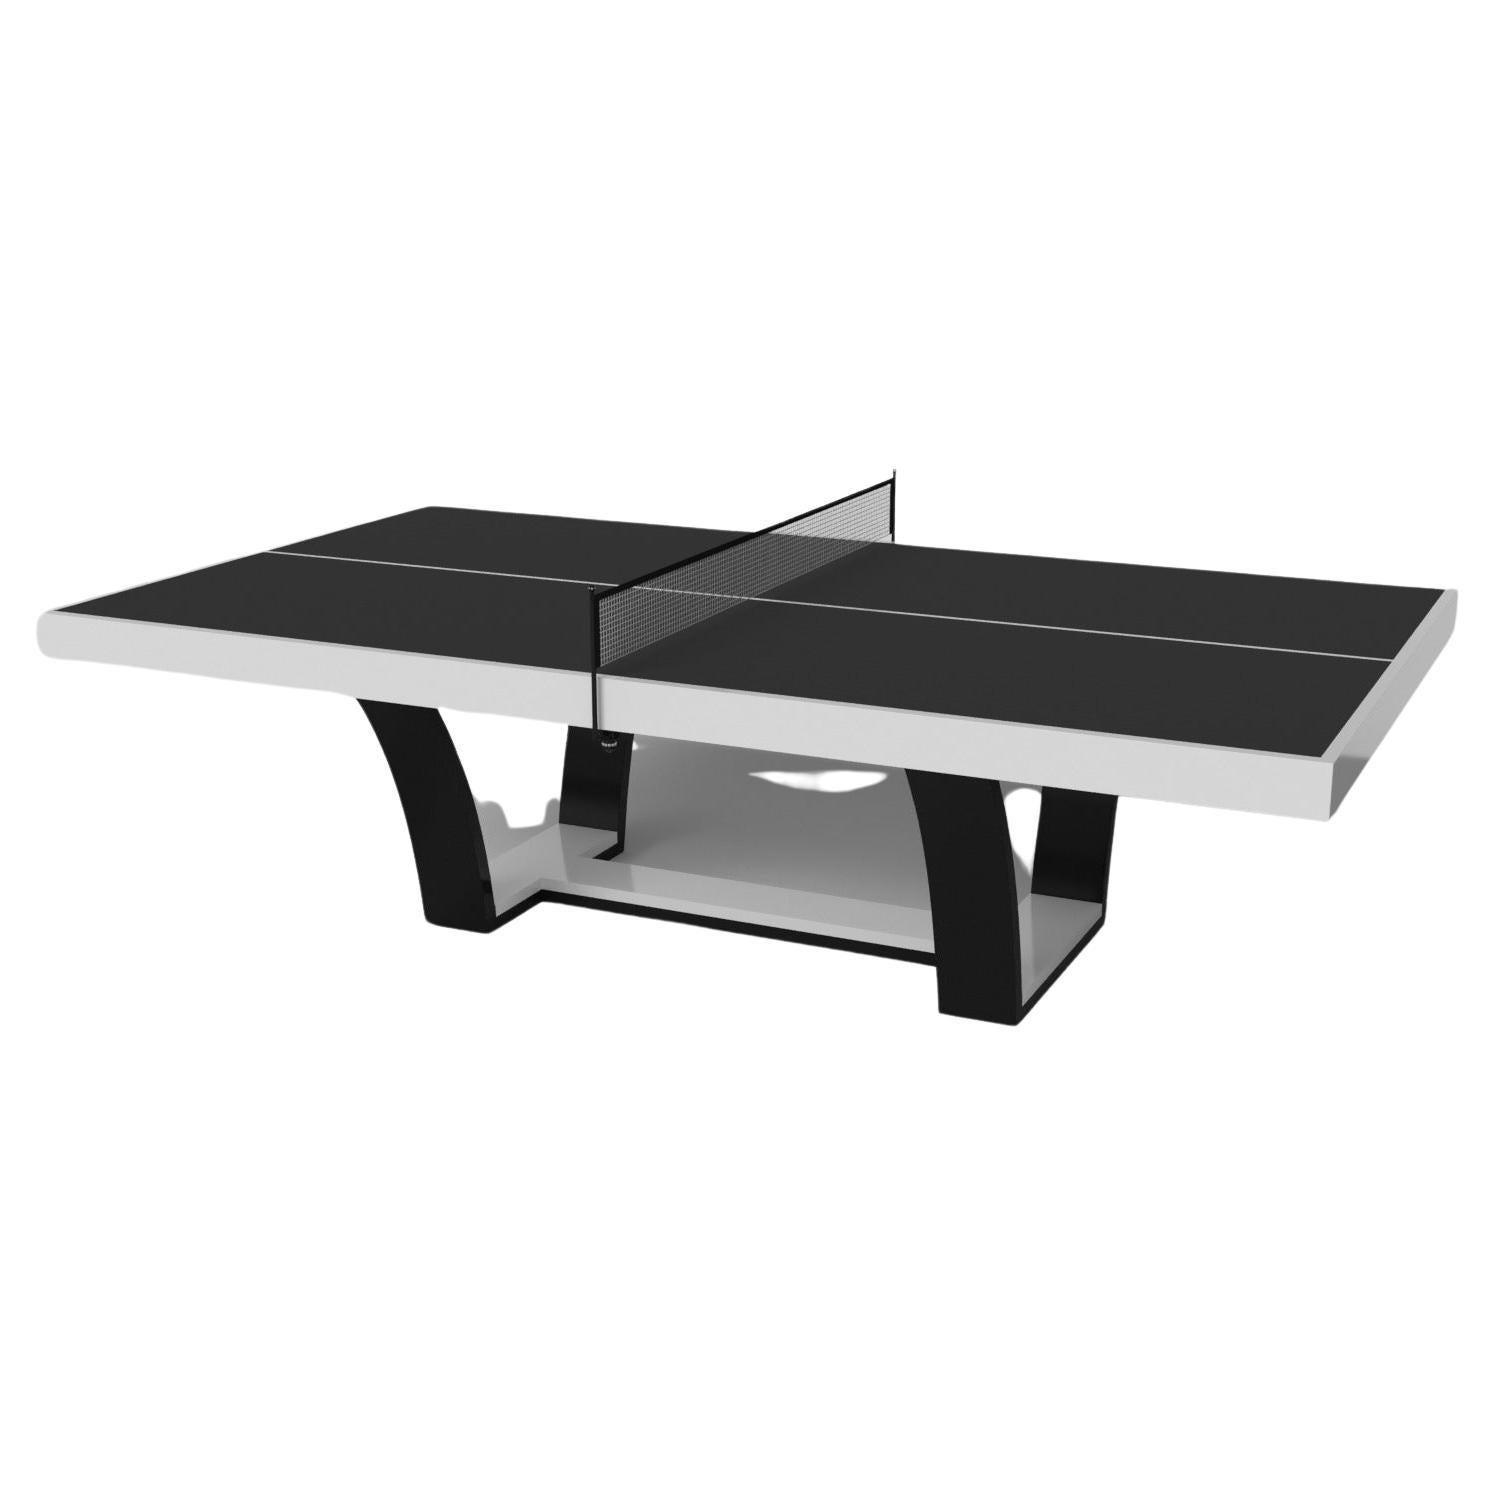 Elevate Customs Elite Tennis Table/Stainless Steel Sheet Metal in 9'-Made in USA For Sale